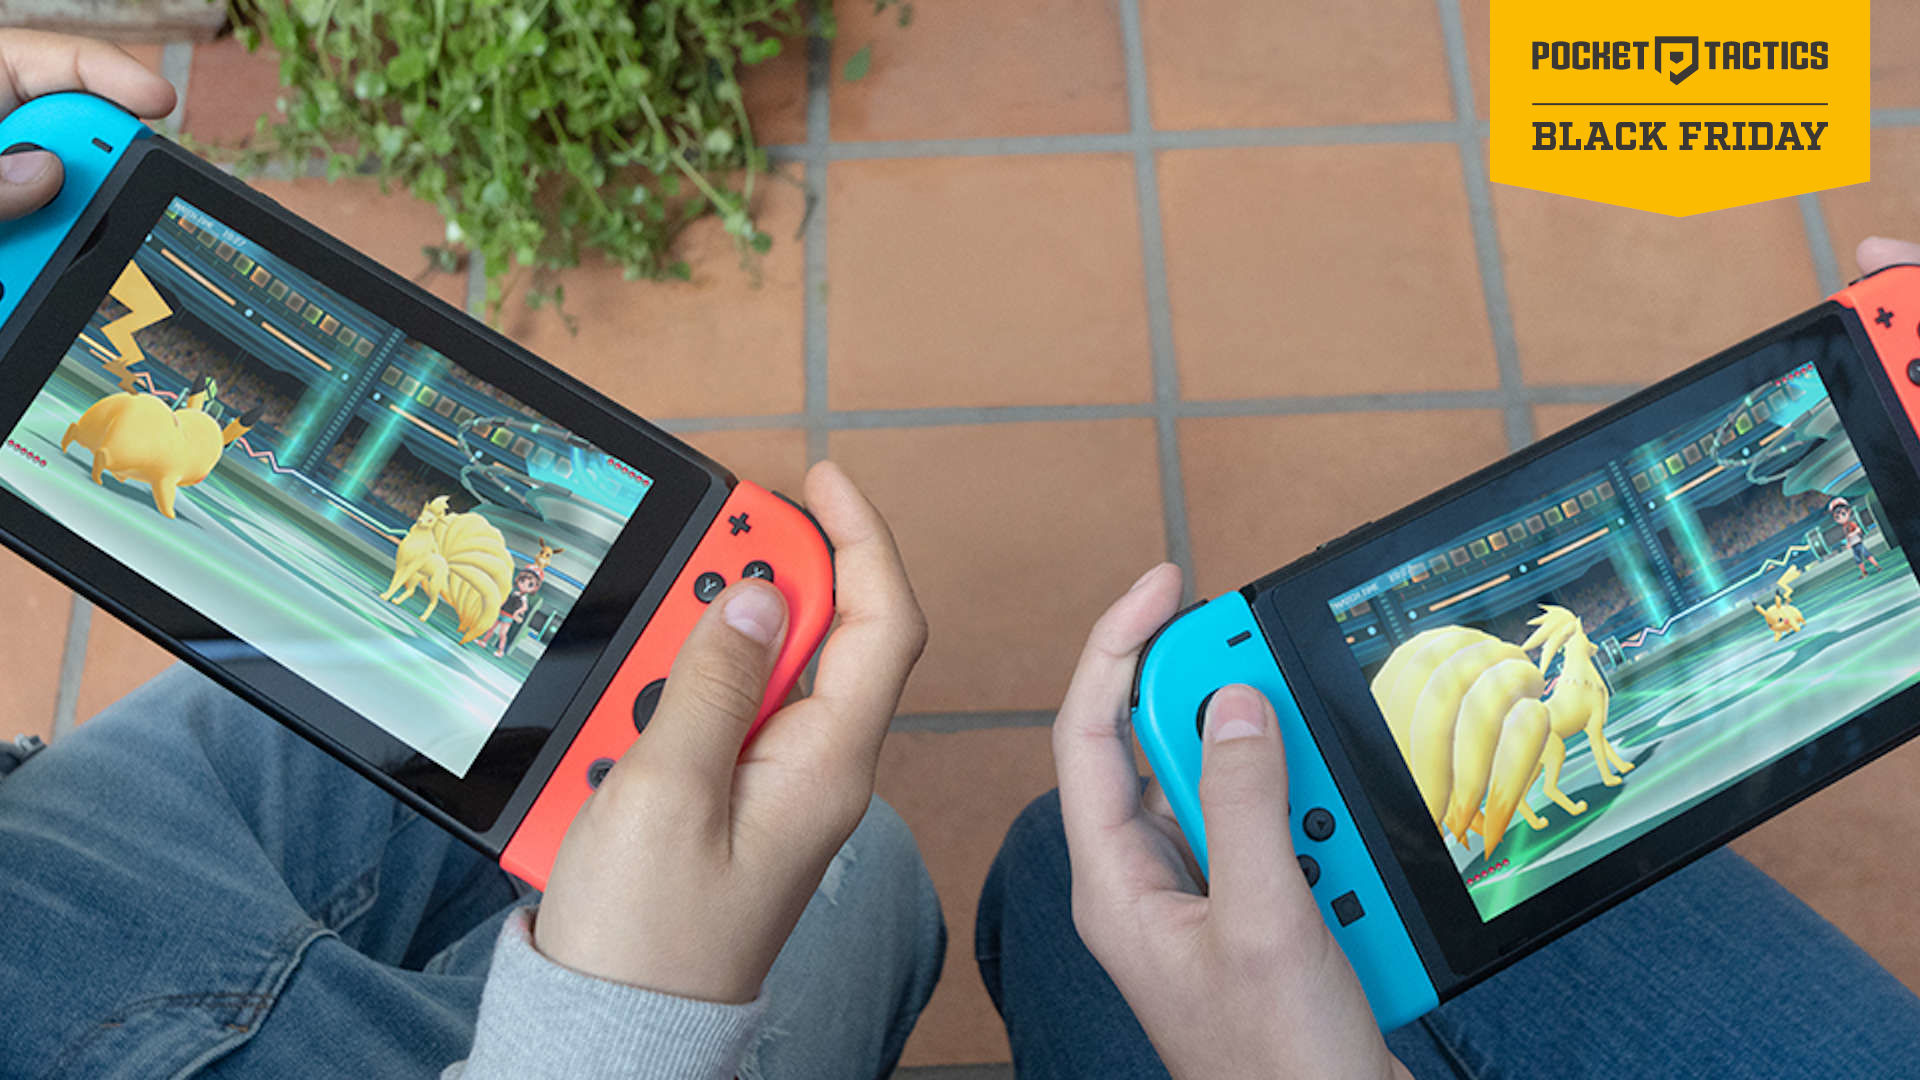 Amazon Leads Black Friday Deals With A Sizzling Nintendo Switch Bundle Pocket Tactics